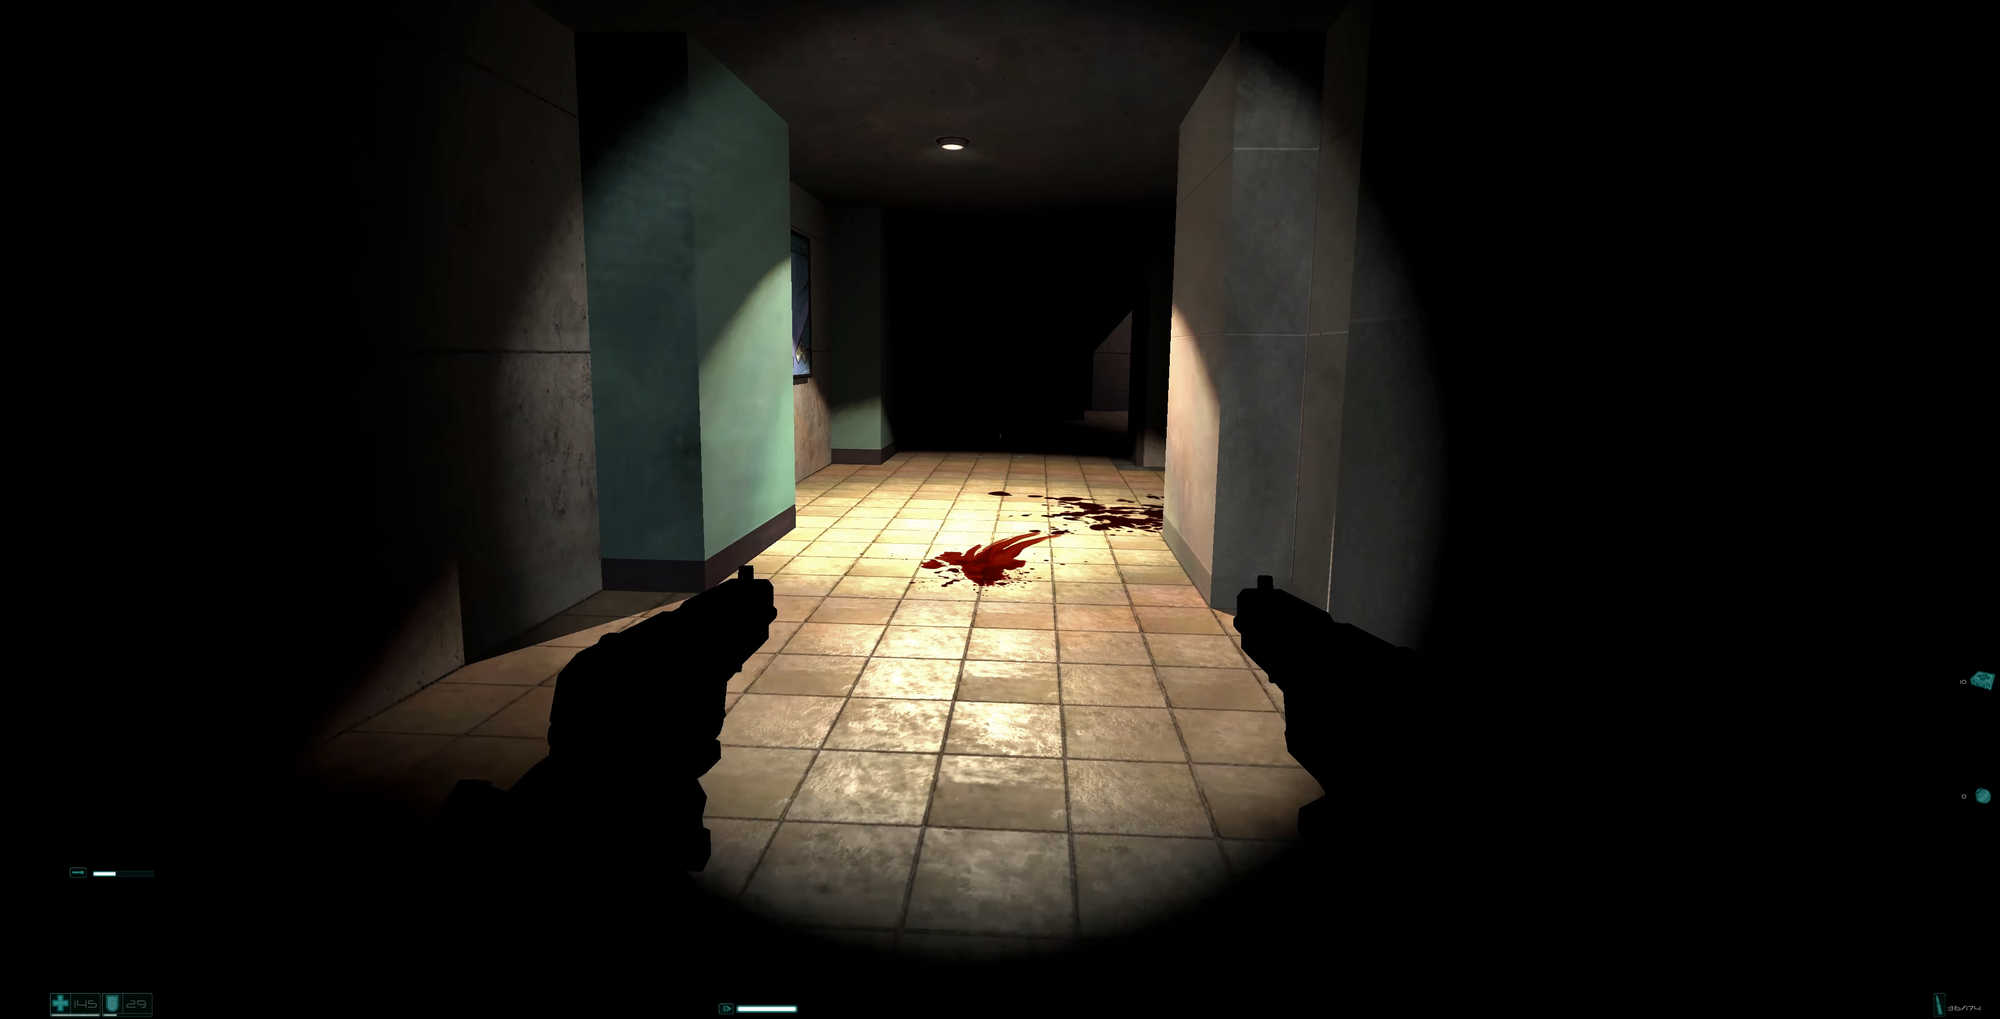 Screenshot from the game. The player is dual-wielding two handguns in a dark, tiled room. The centre of the image is lit up, revealing blood traces on the tiles.